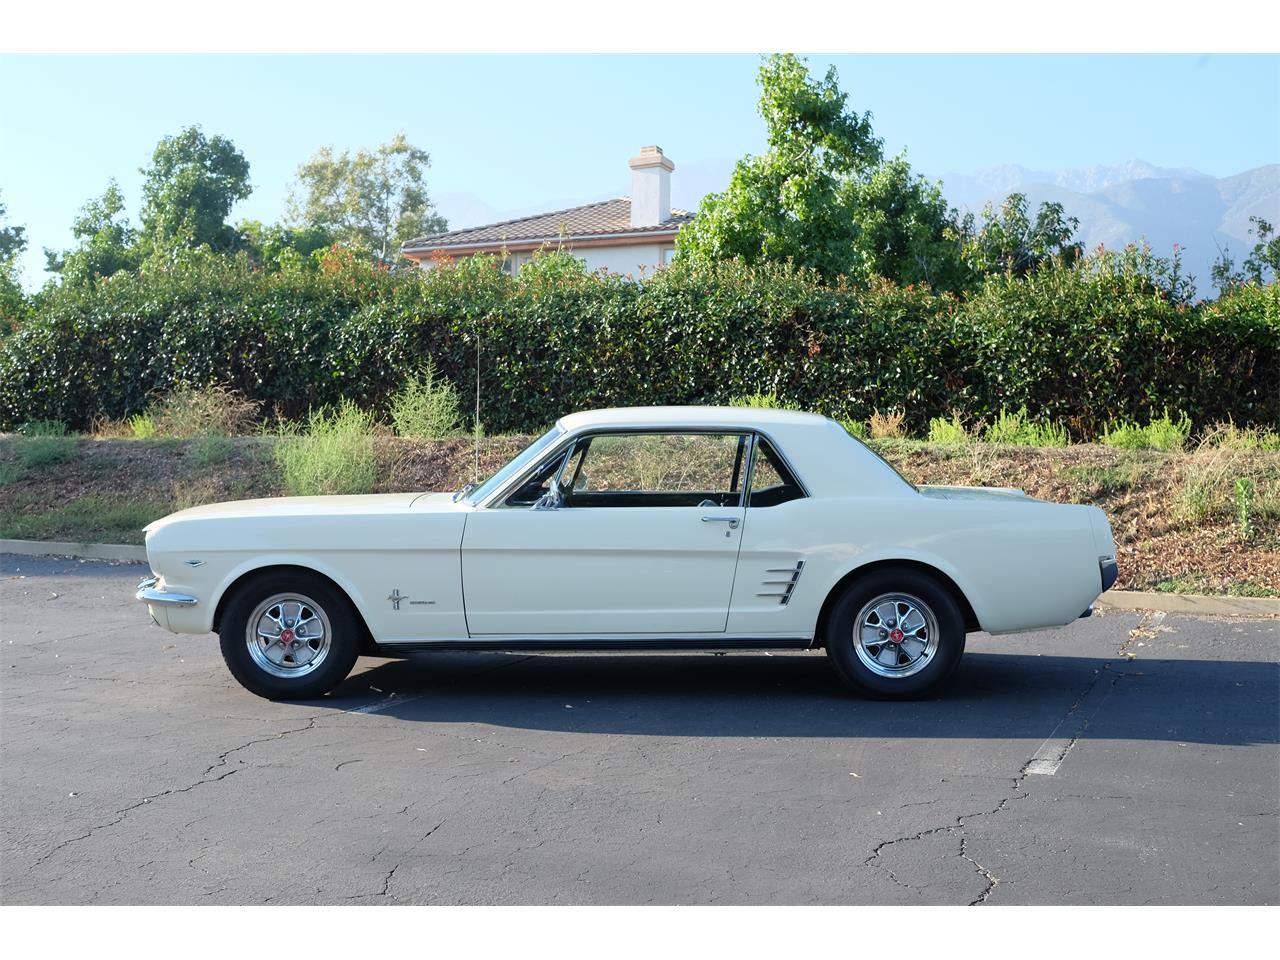 For Sale: 1966 Ford Mustang in Rancho Cucamonga, California for sale in Rancho Cucamonga, CA